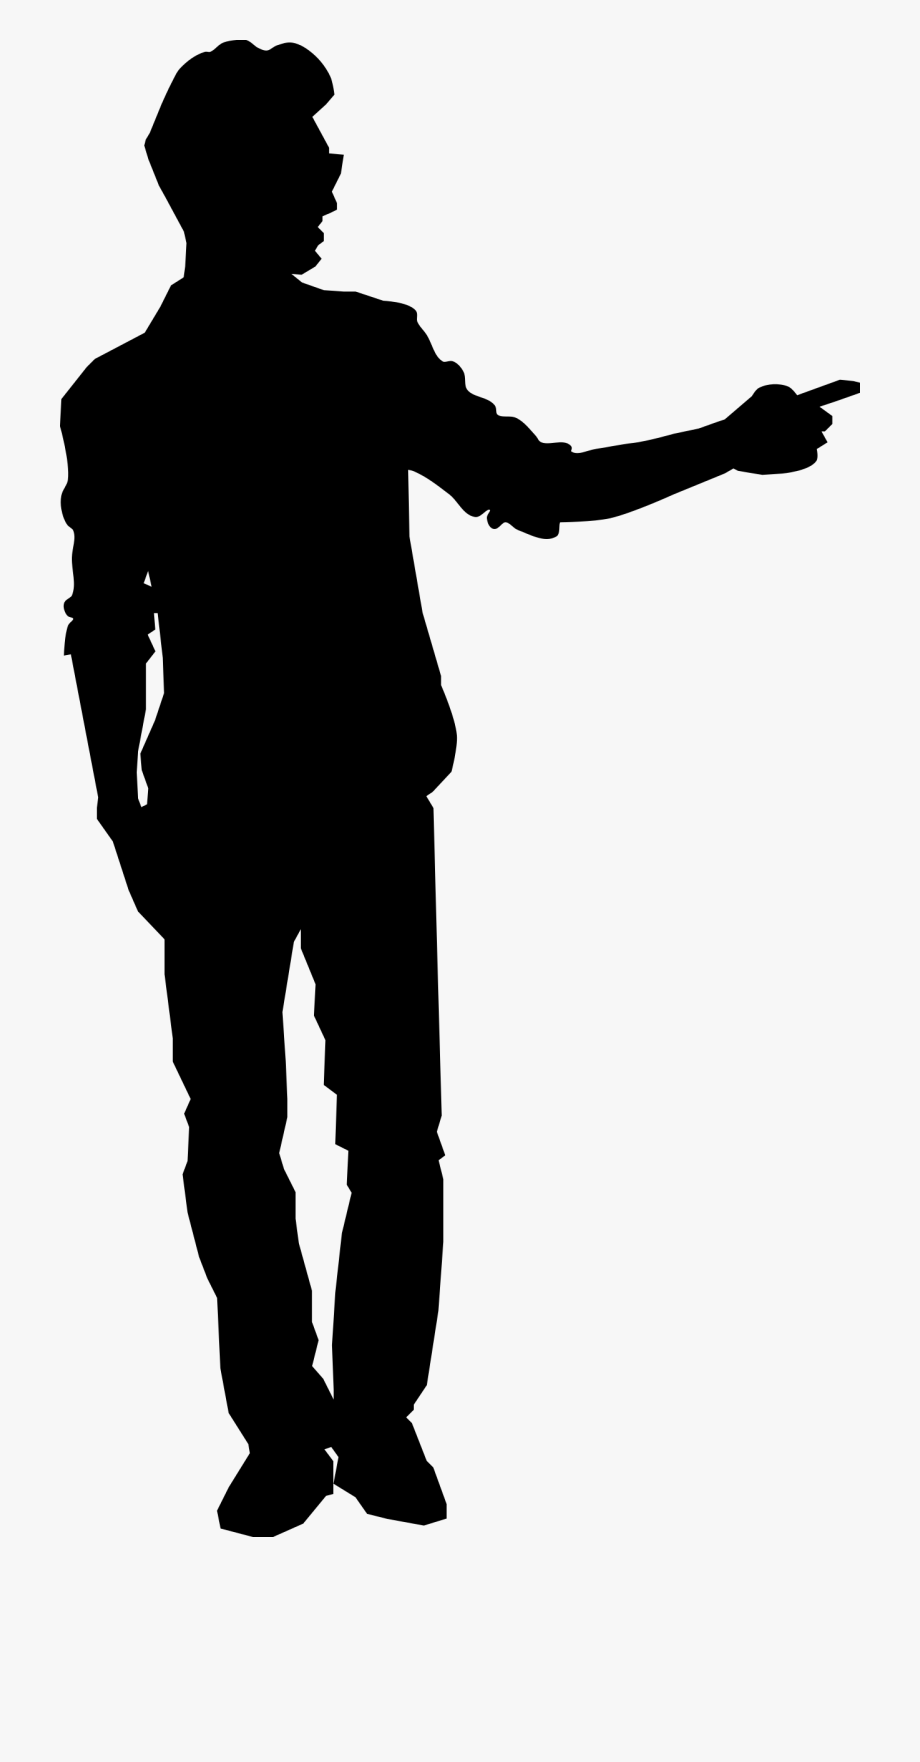 Man pointing silhouette.